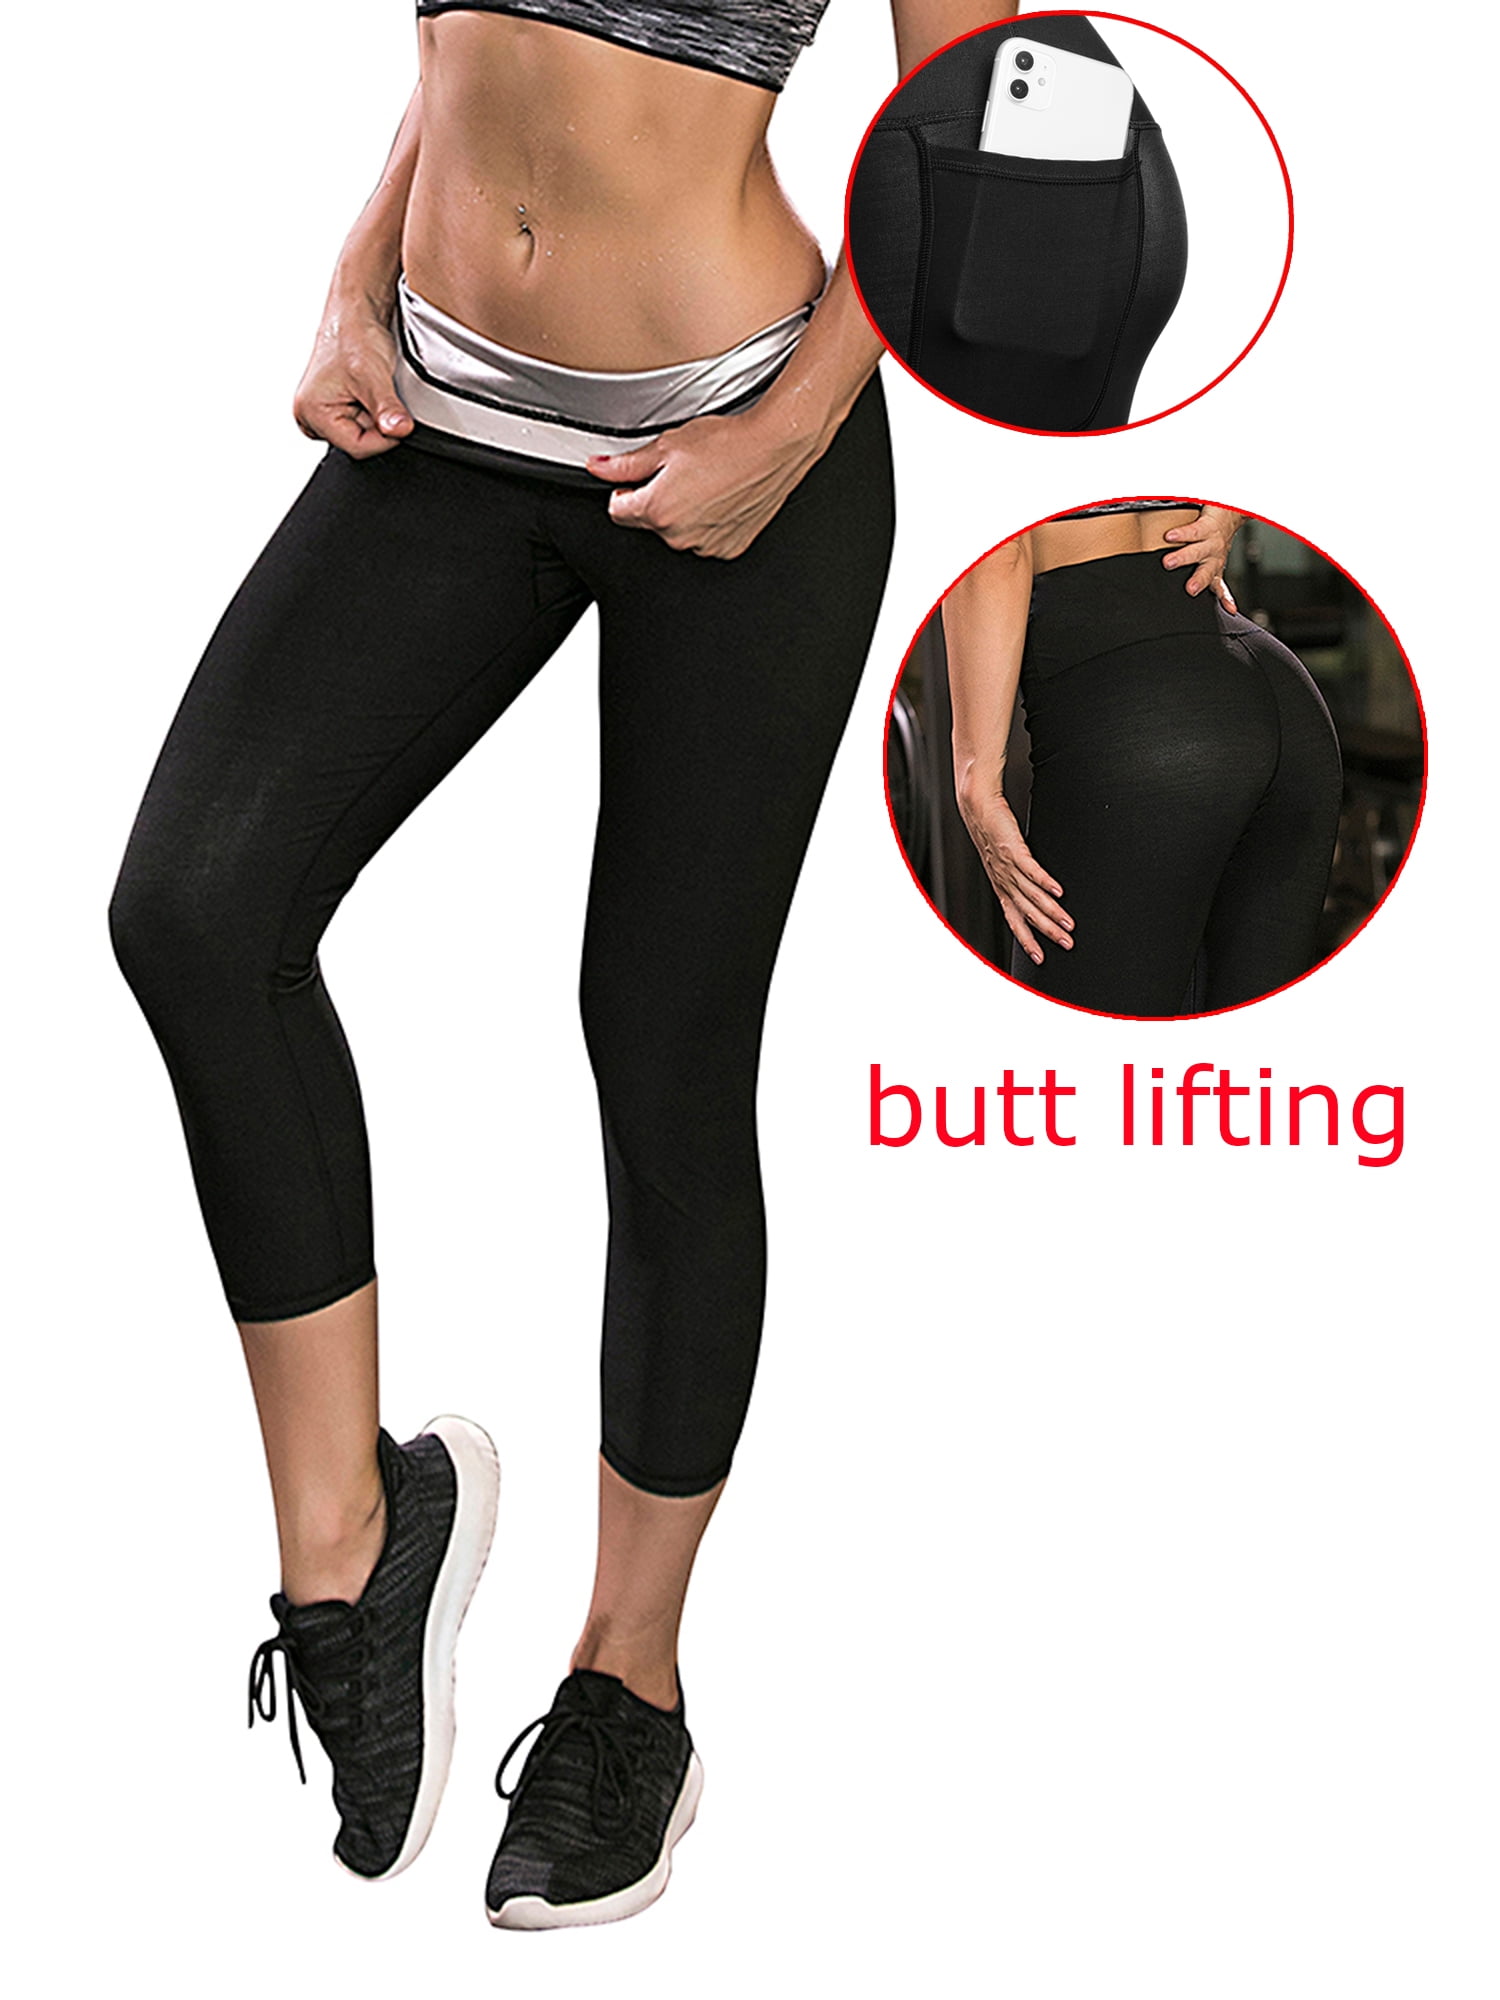 AINIC Running Shorts Womens Black/Grey/White High Waisted Yoga Pants for Gym Cycling Fitness Workout Exercise Honeycomb Leggings Butt Lifter Blum Lift 